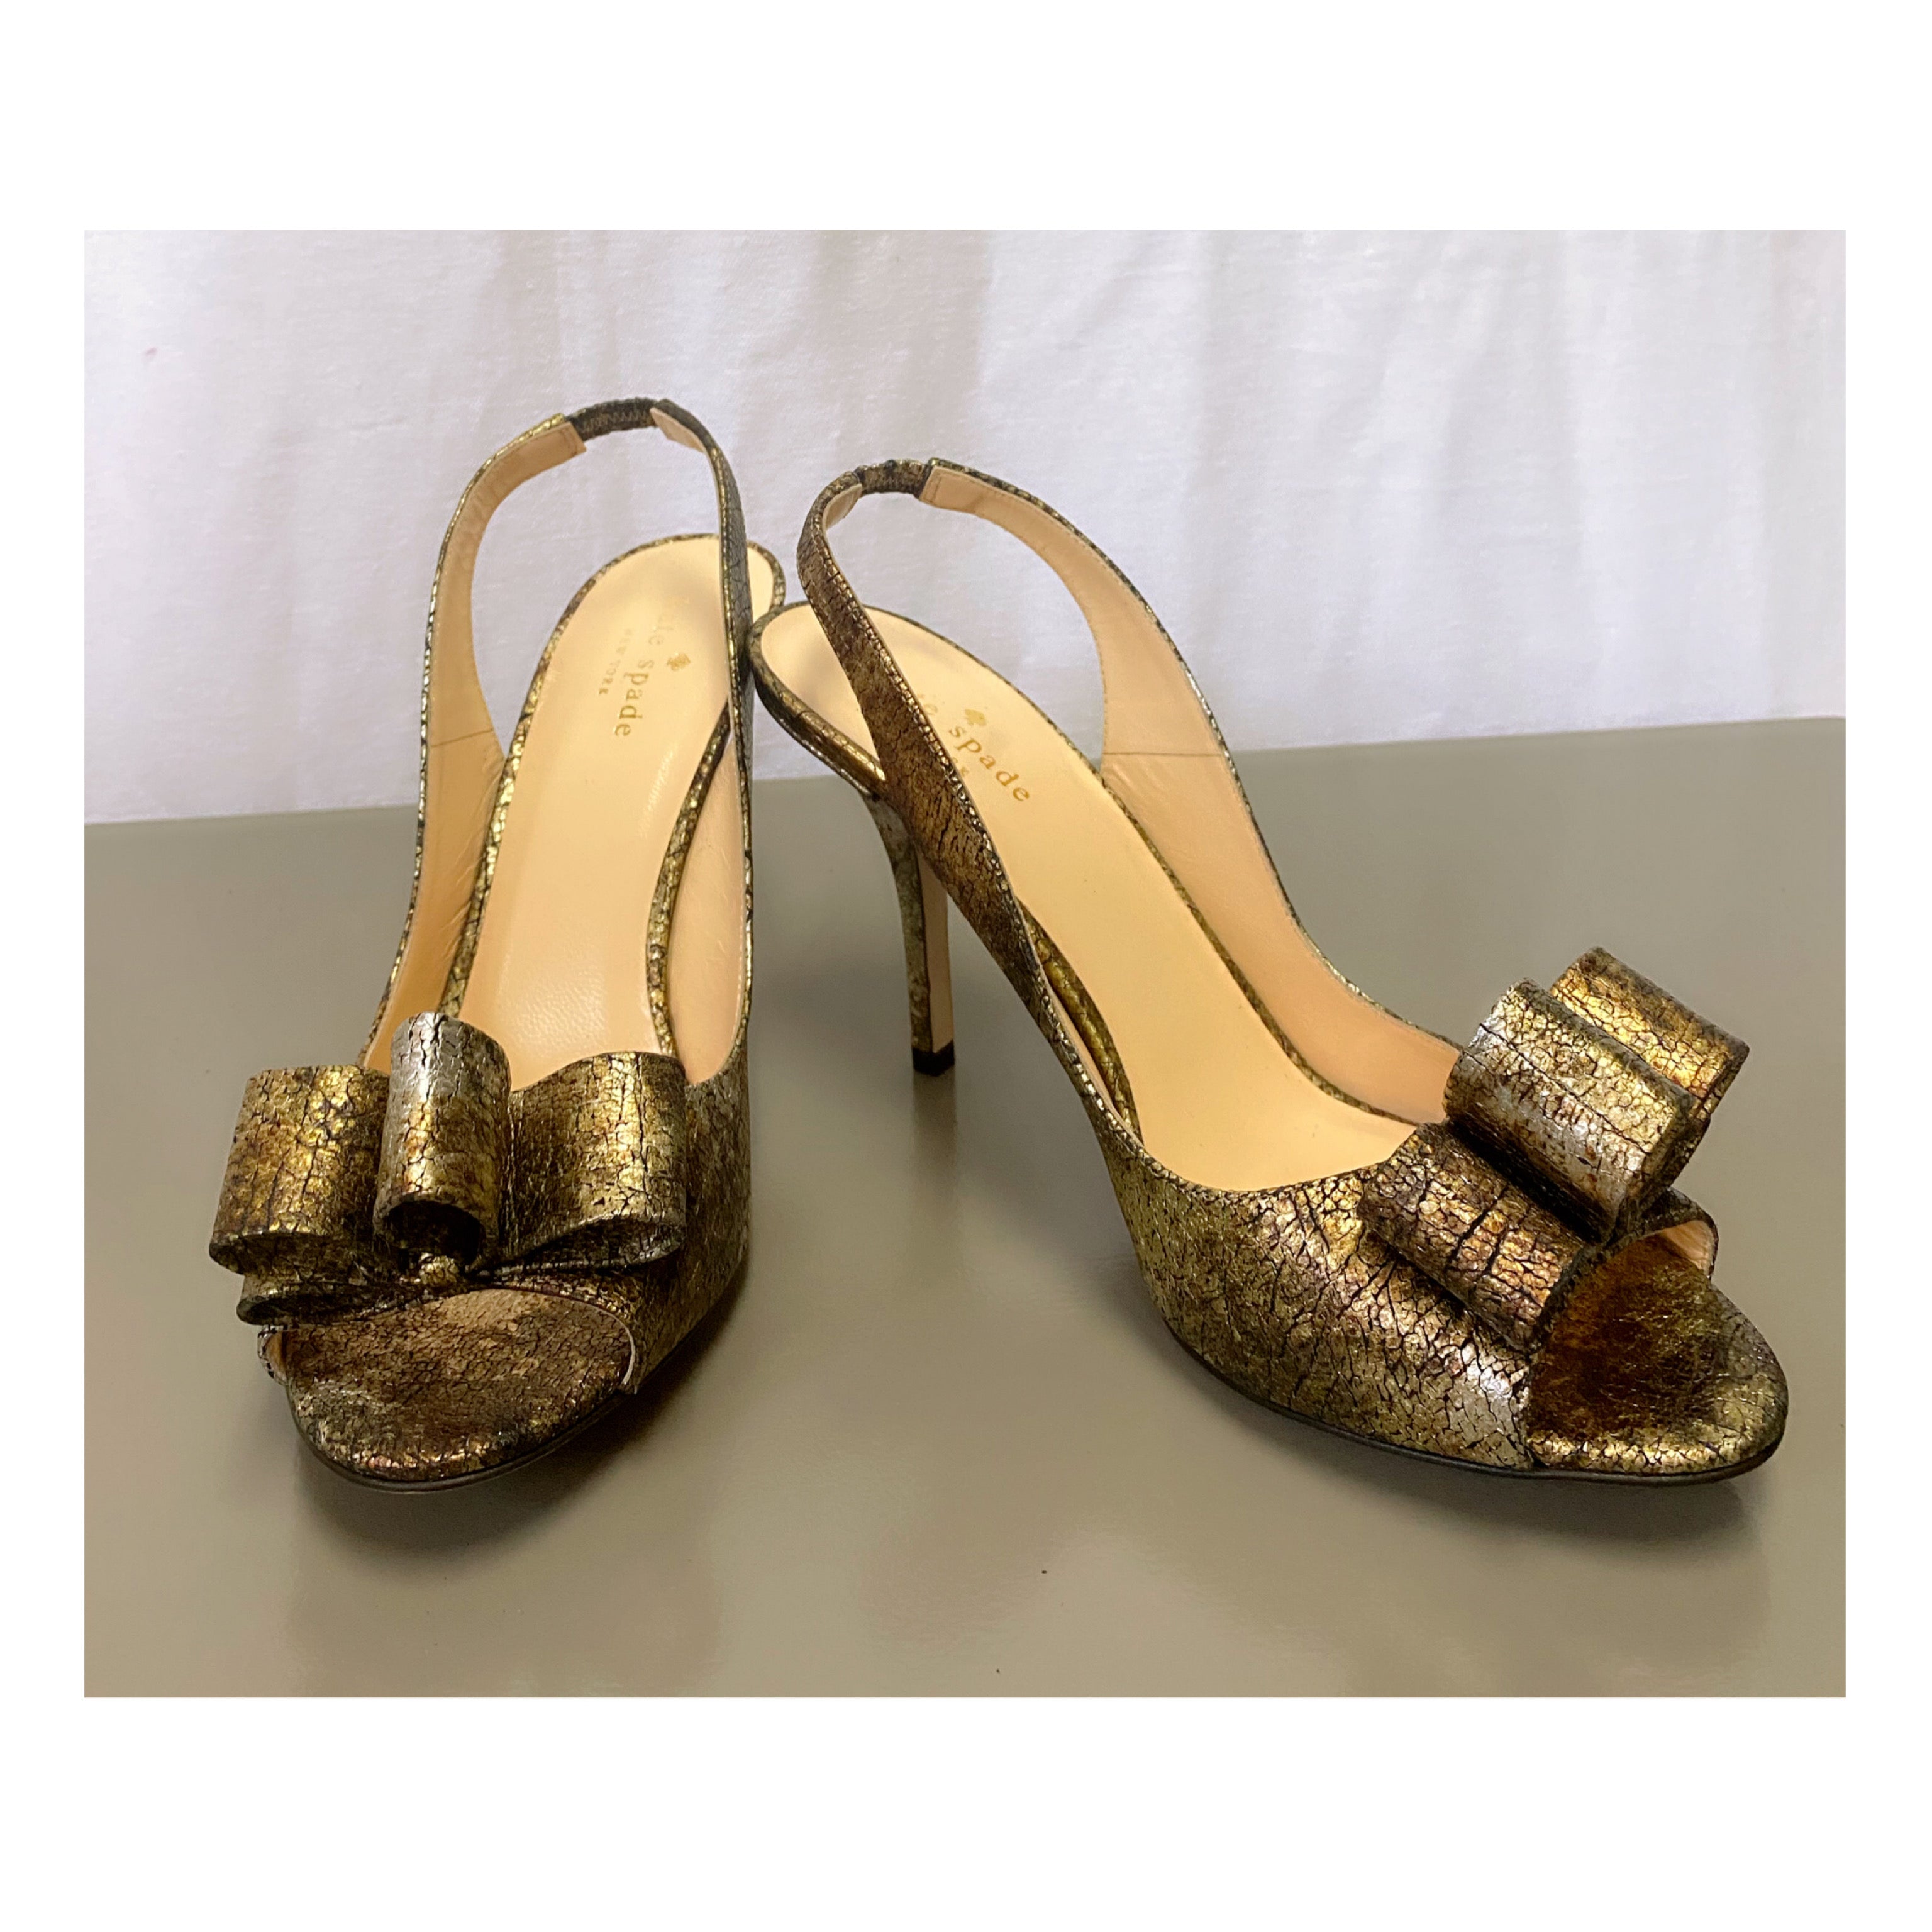 Kate Spade Charm bronze metallic shoes, sizes 7 and 8.5, NEW IN BOX!